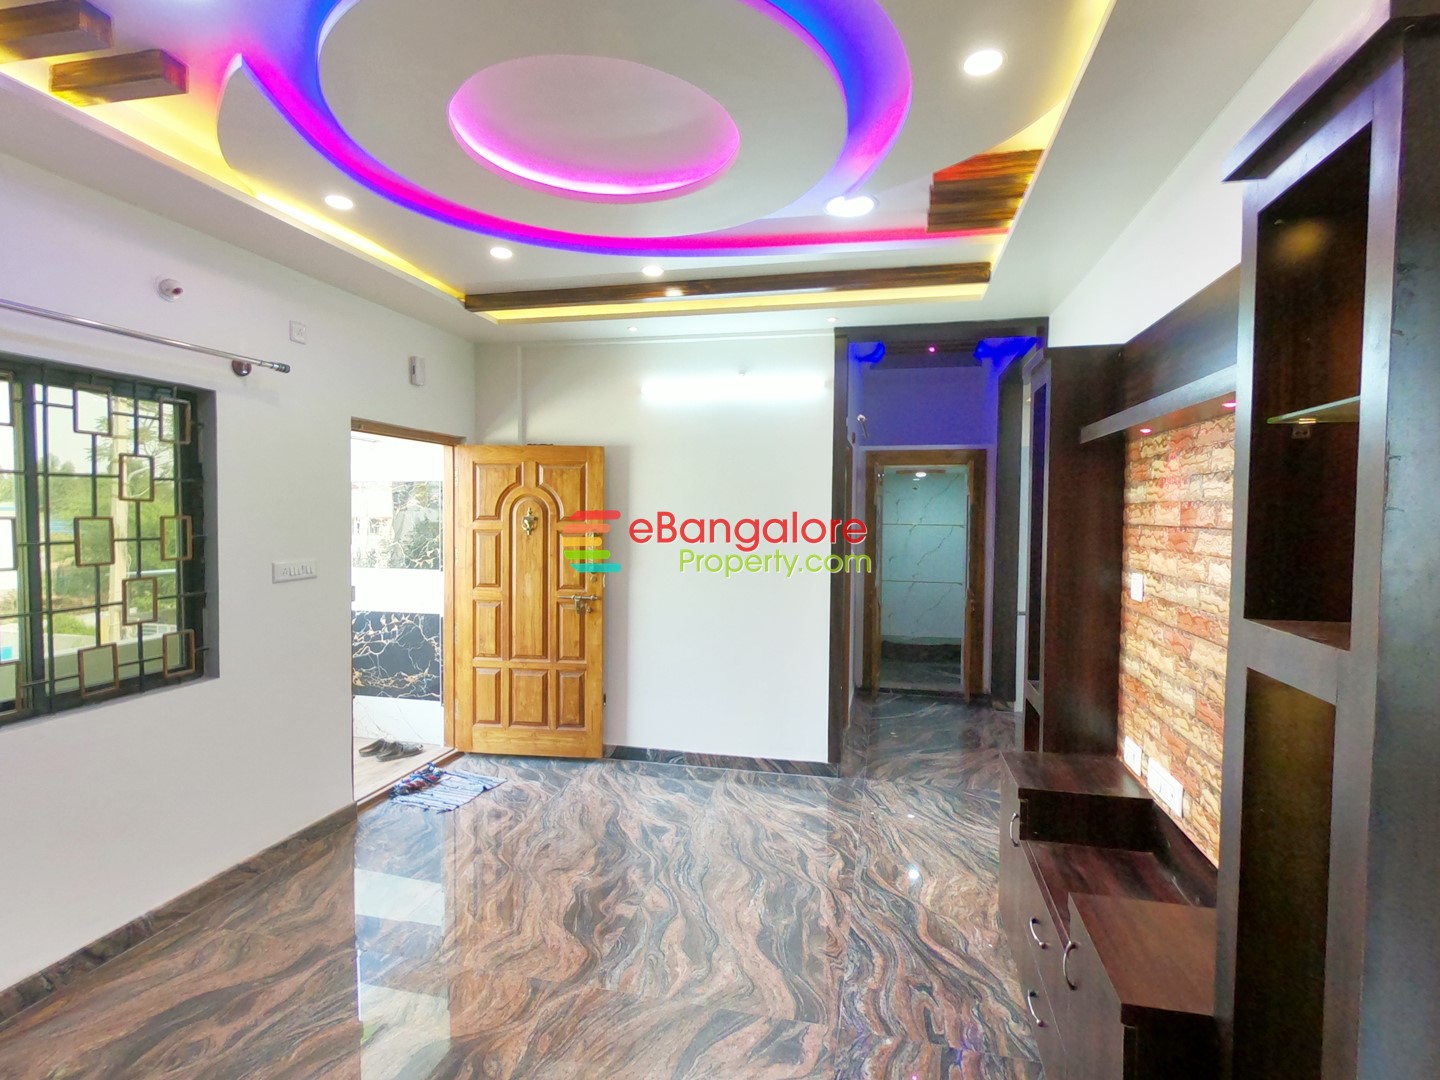 Vidyaranyapura Ext – 4 Unit Building For Sale on 30×40 with 3BHK For Owner Stay – BLR 43